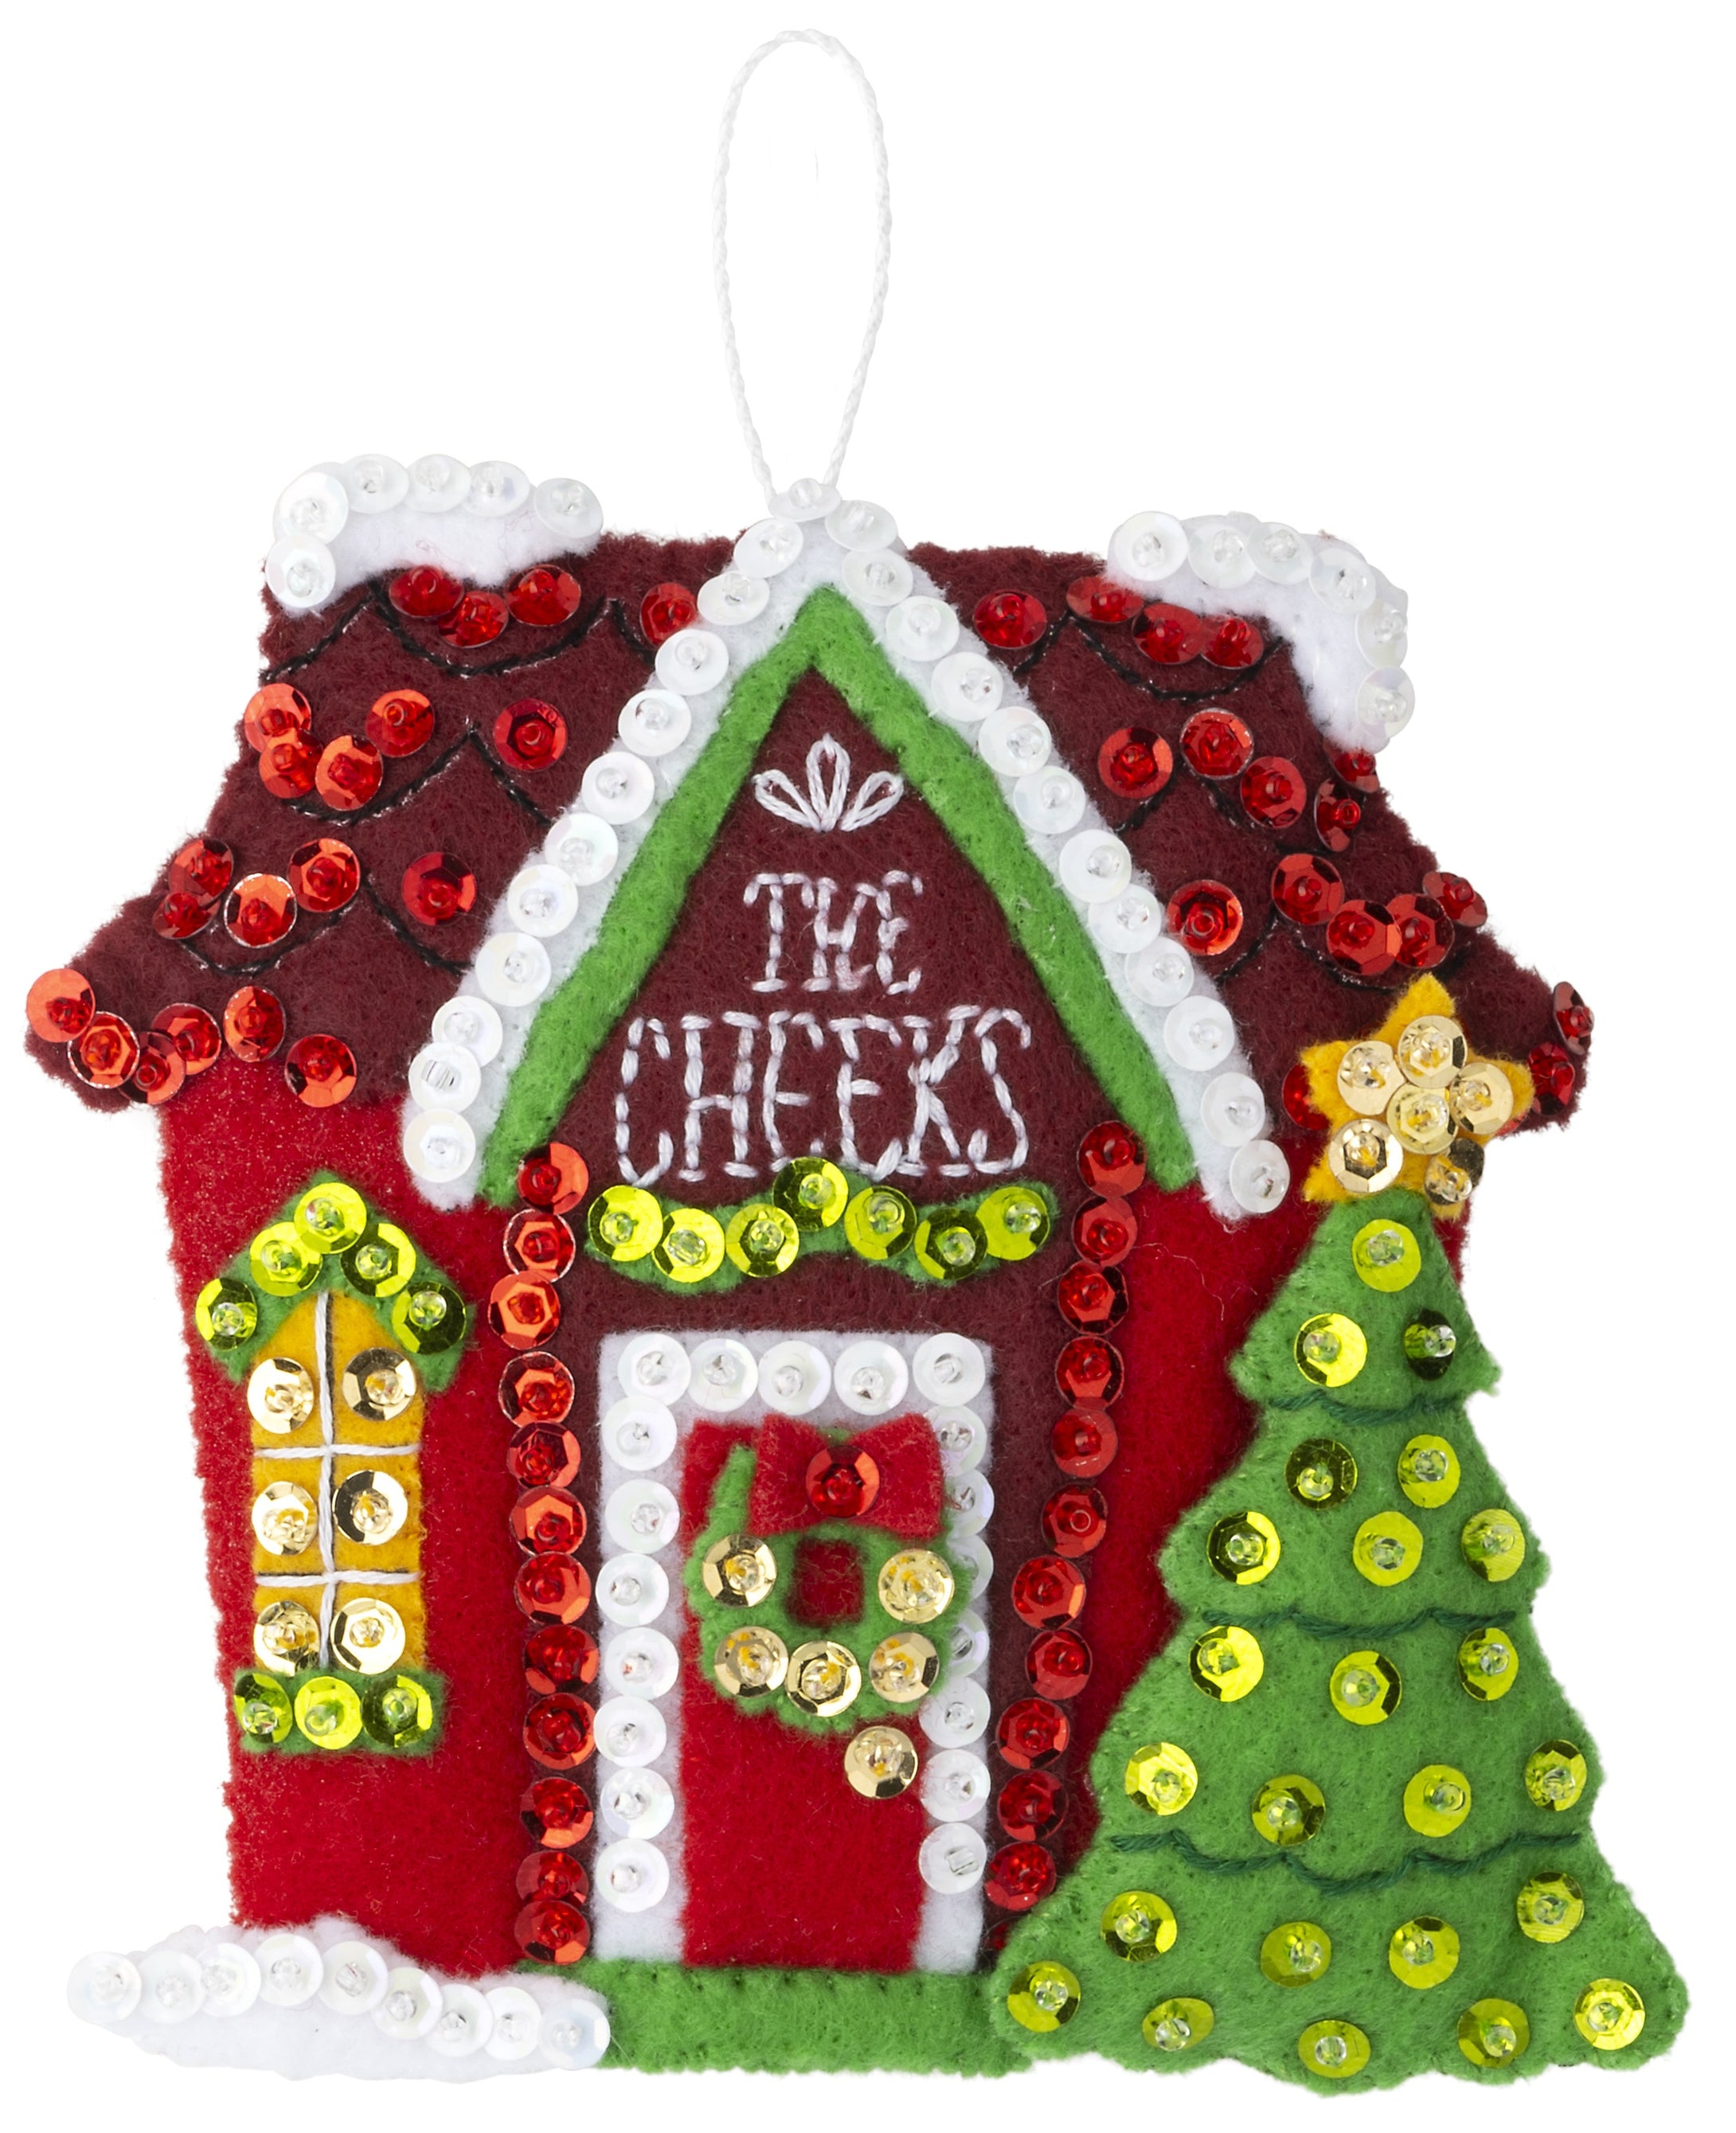 Bucilla Felt ornament kit. Design features  a red house decorated for Christmas with room to personalize the name at the top.